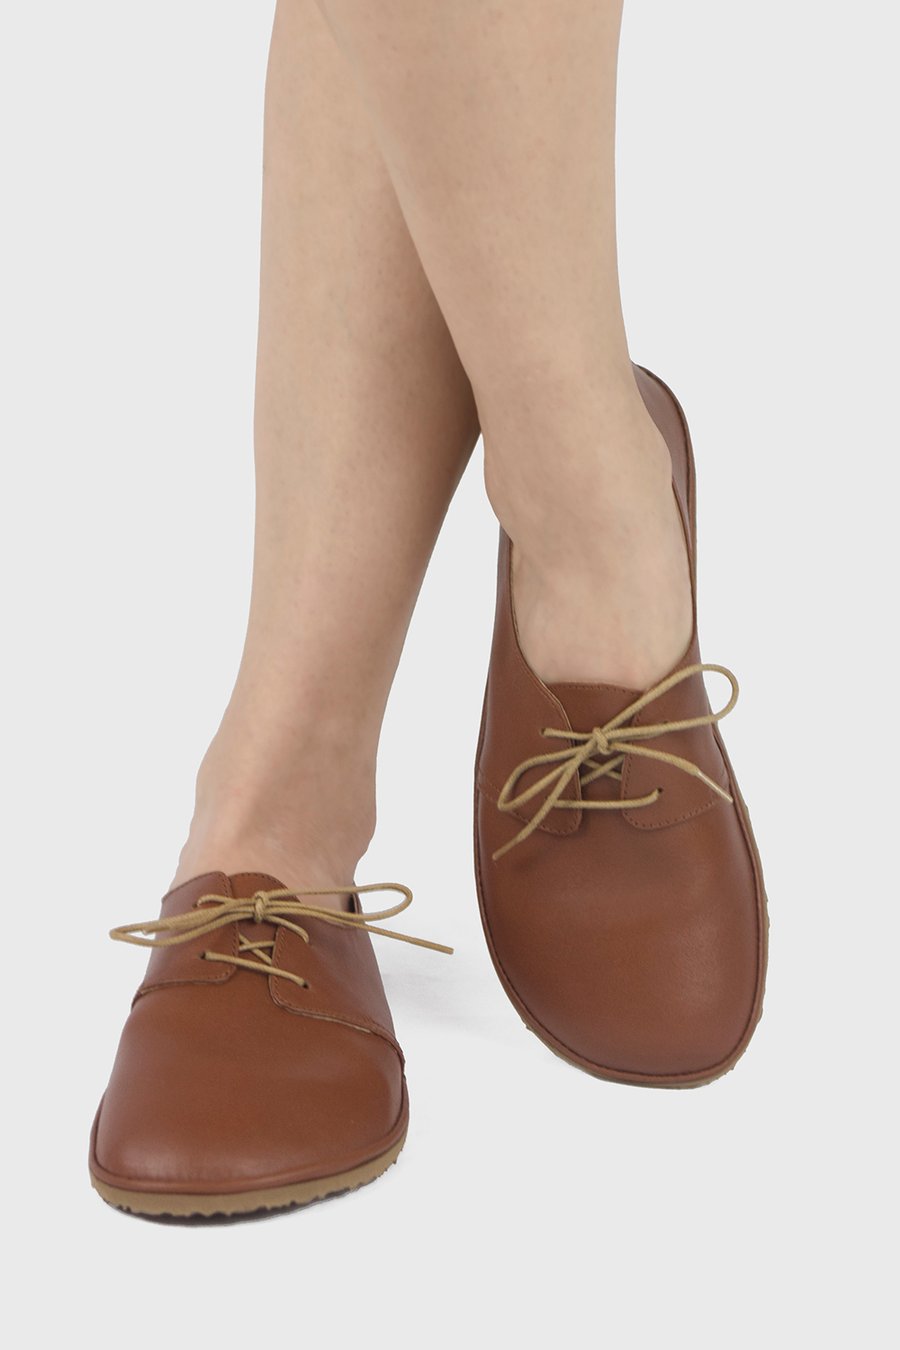 Image of Bliss flats in Tobacco brown